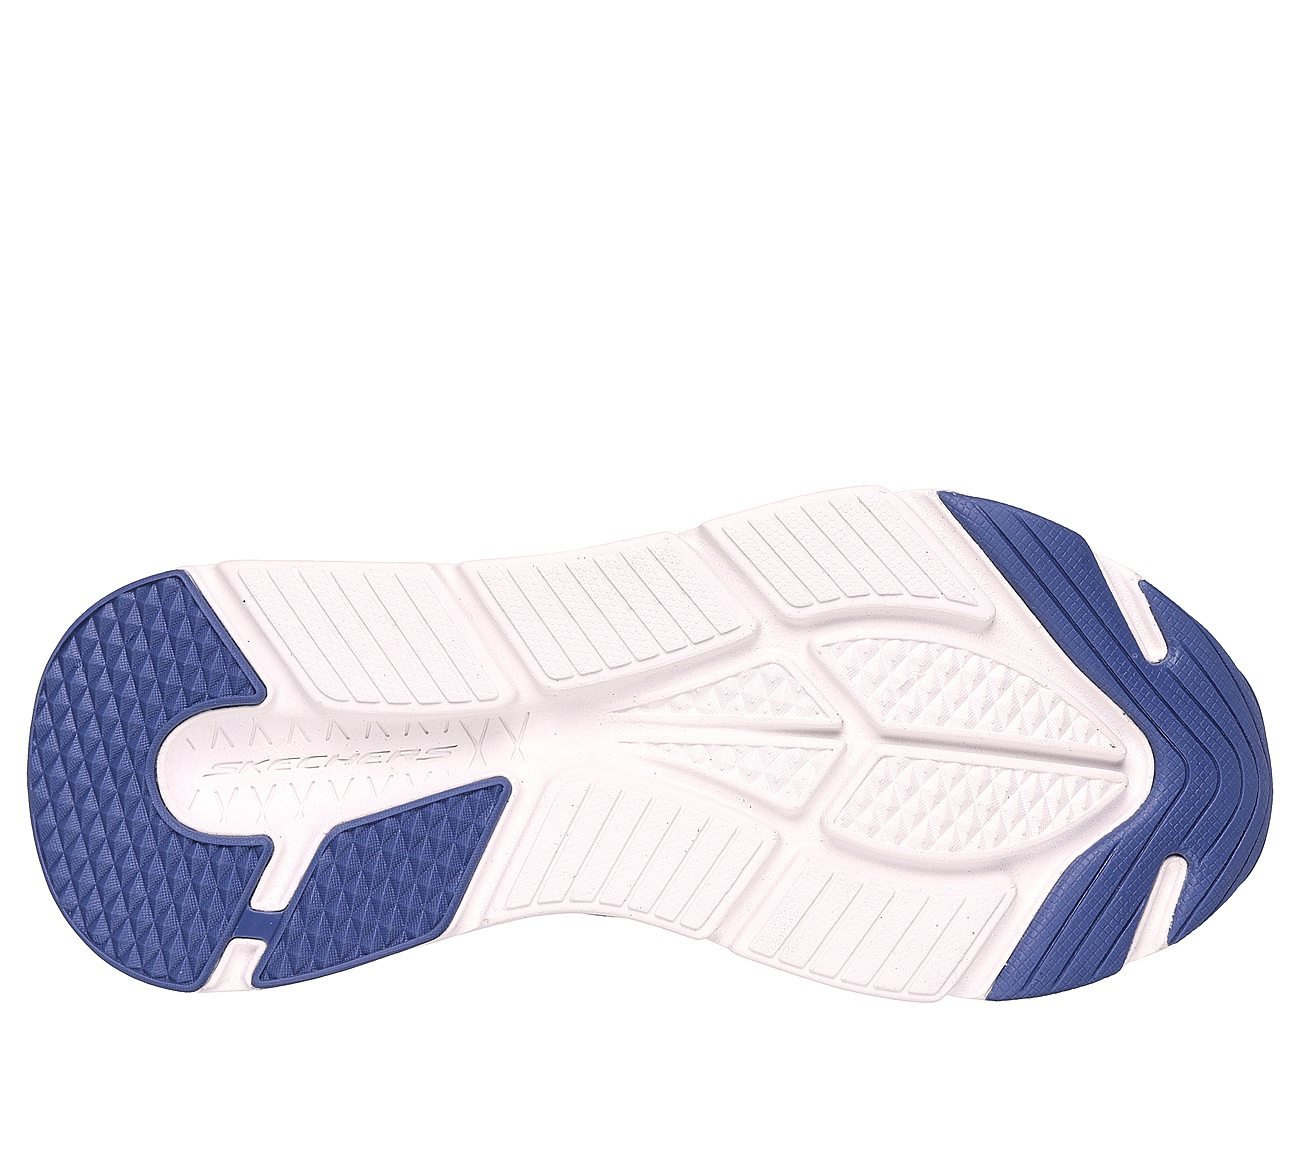 MAX CUSHIONING ELITE-SMOOTH T, CHARCOAL/BLUE Footwear Bottom View